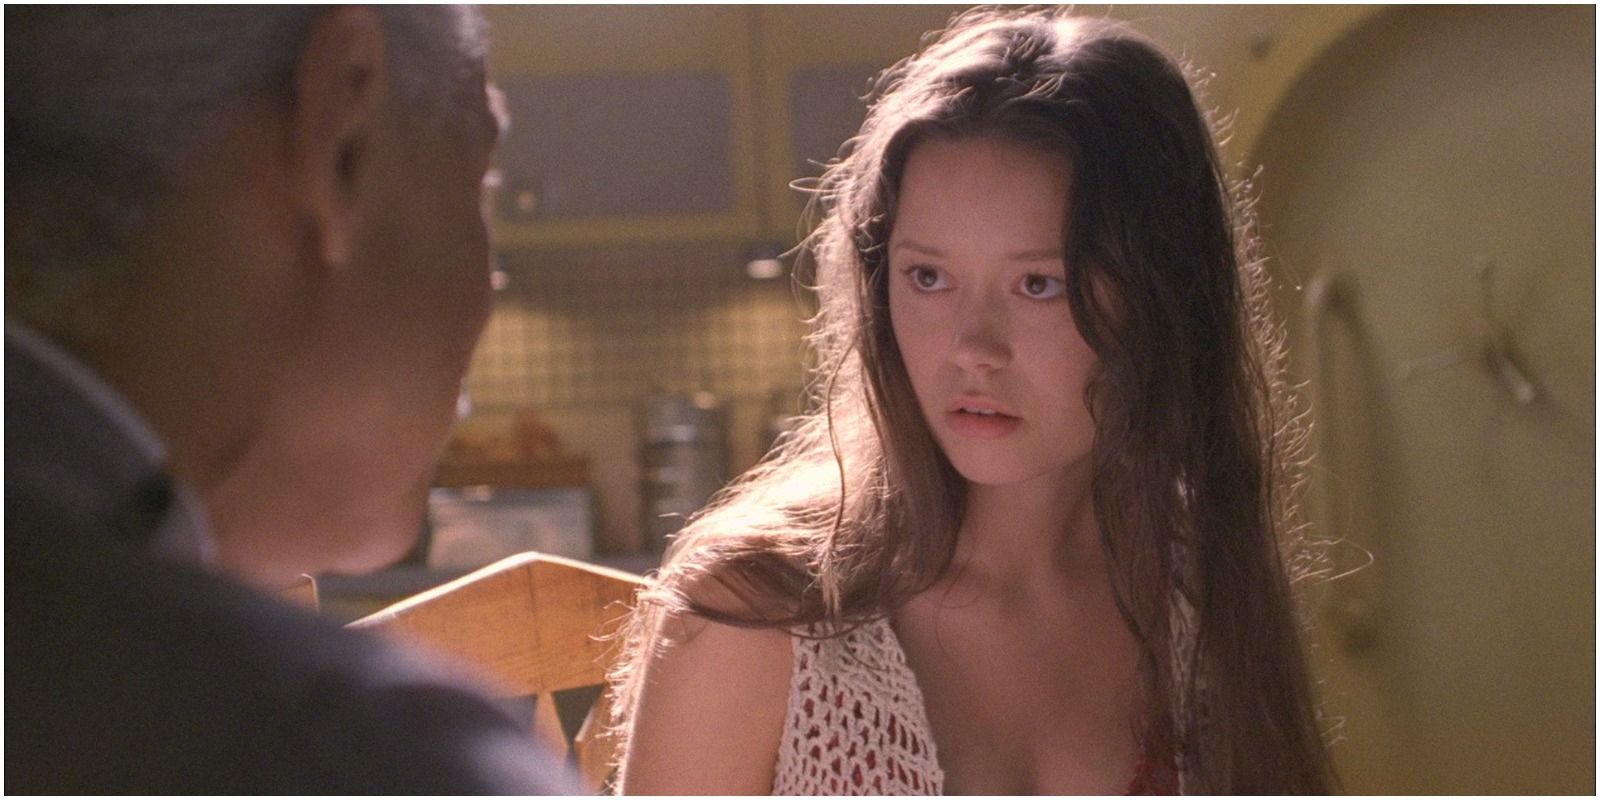 River Tam speaking with Shepherd Book in Firefly